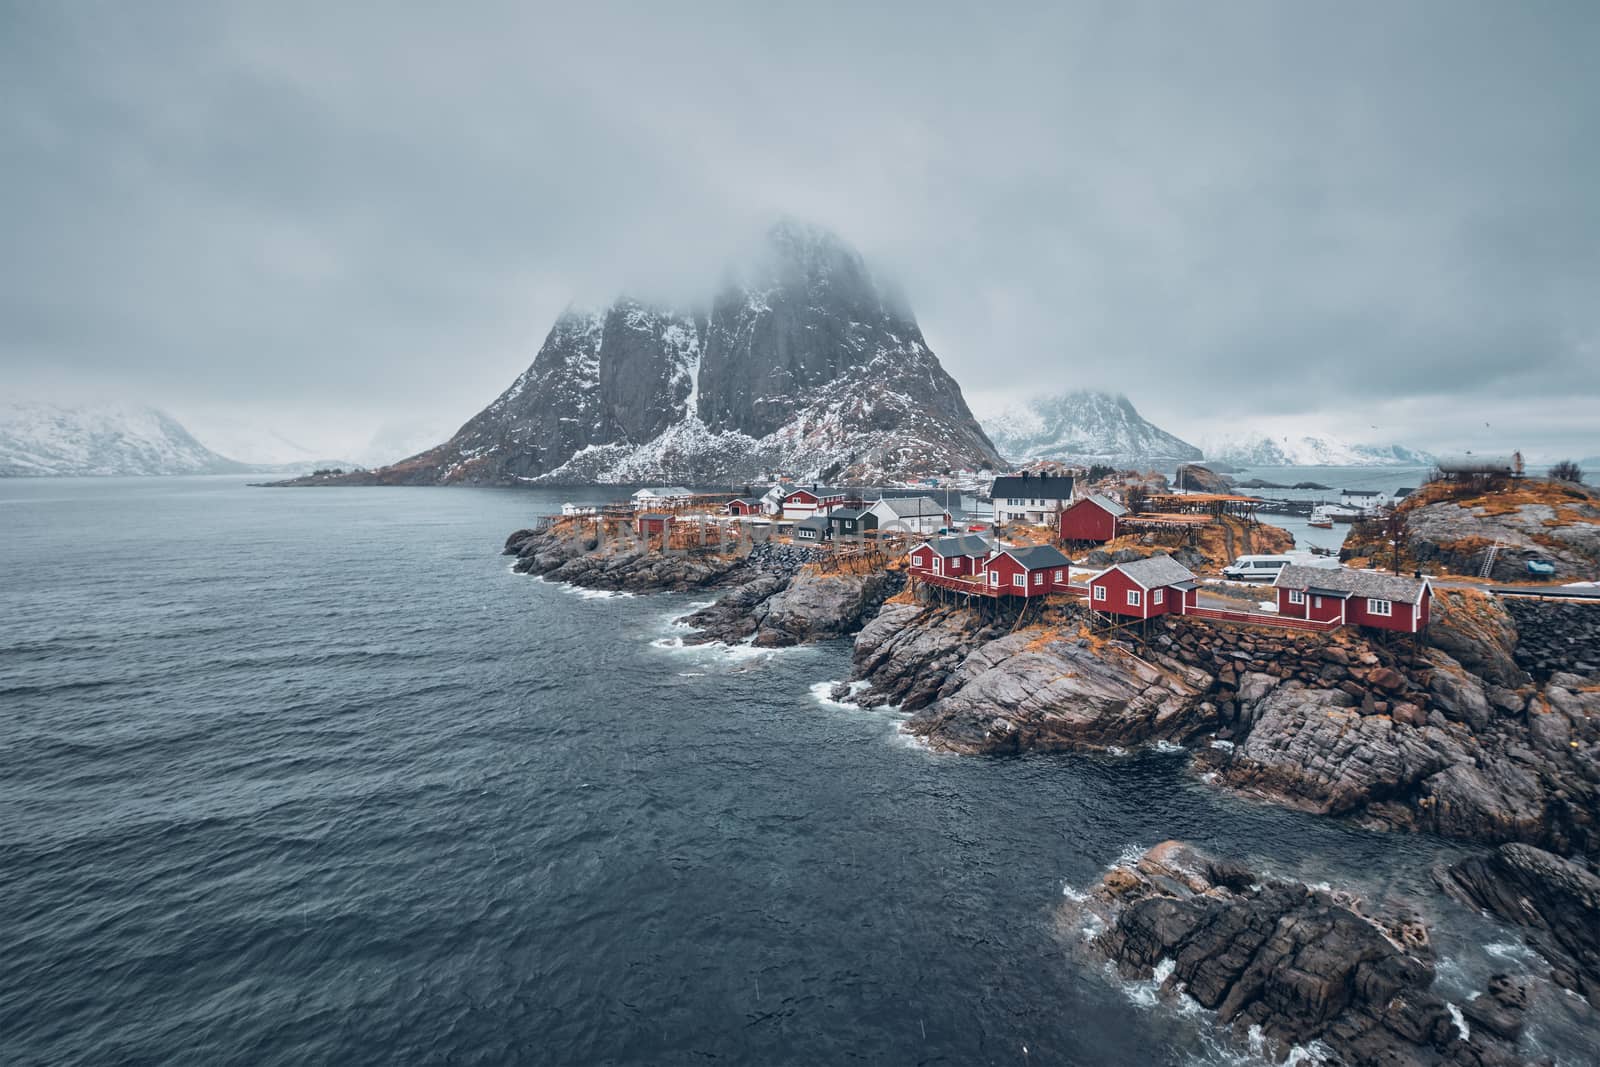 Famous tourist attraction Hamnoy fishing village on Lofoten Islands, Norway with red rorbu houses. With falling snow in winter